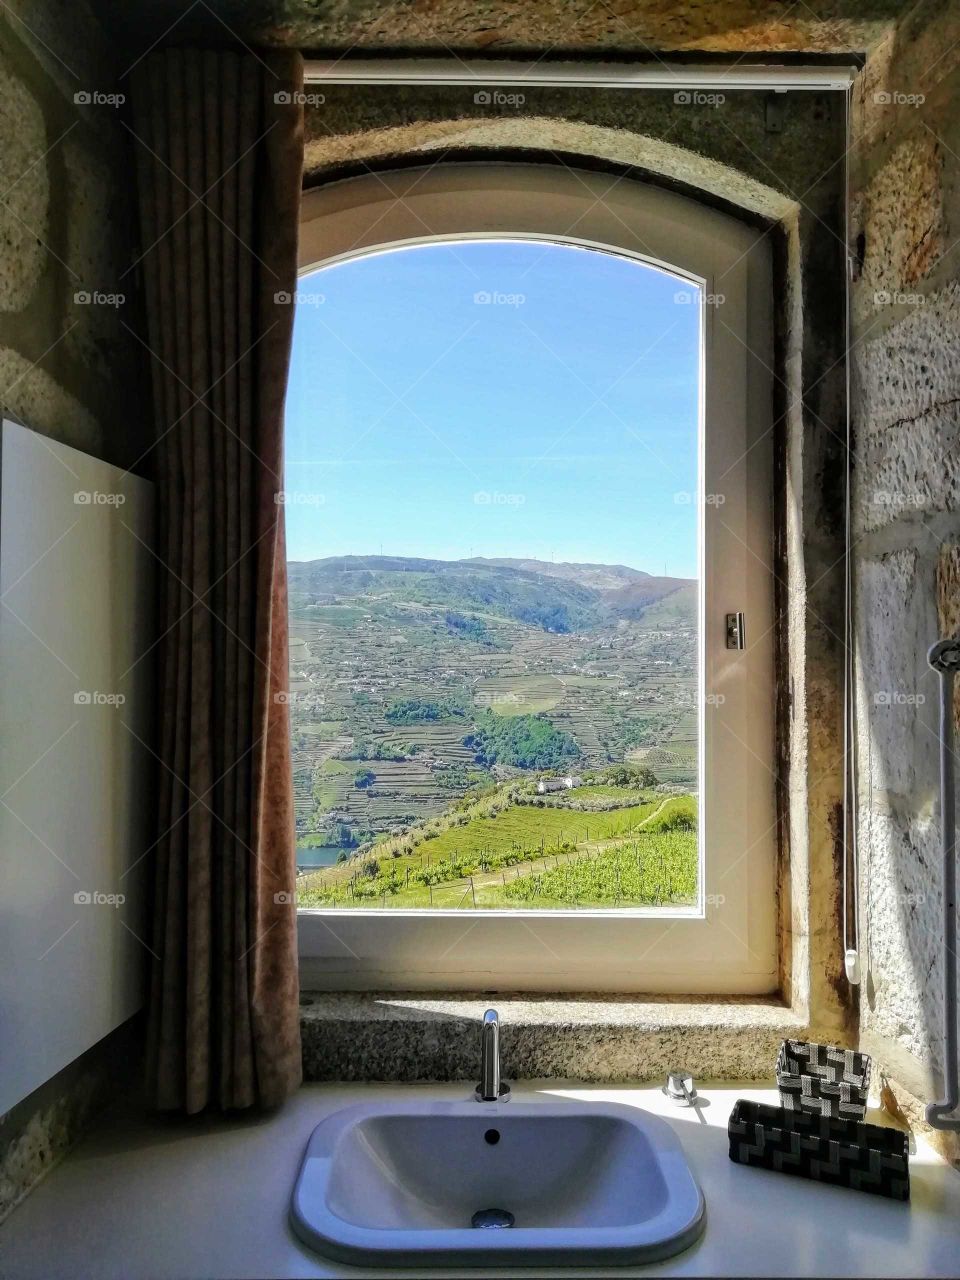 View of the Douro vineyards, from the bathroom window of the Douro Scala Hotel